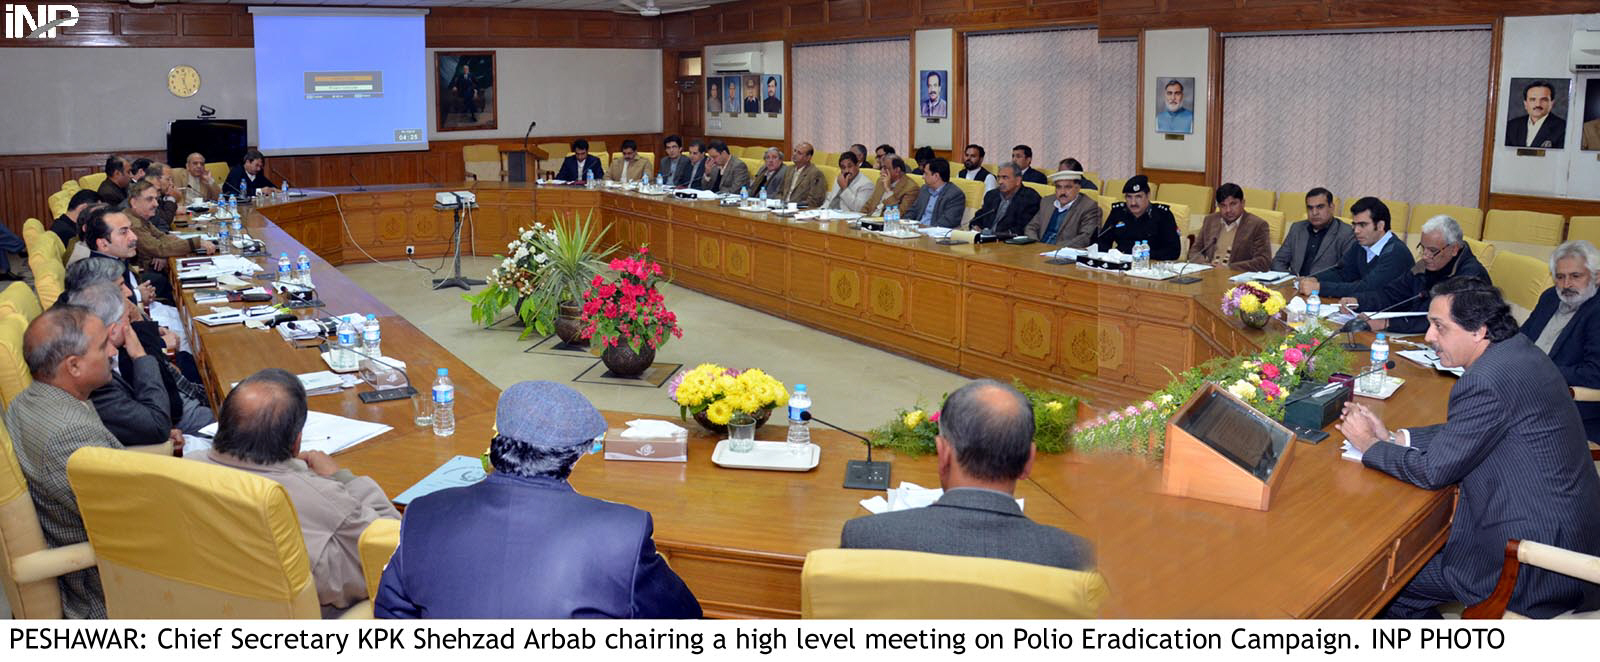 k p chief secretary shehzad arbab r as assured of developments in ensuring provision of facilities teacher recruitment and training publishing of books in english and stipends for female students photo inp file